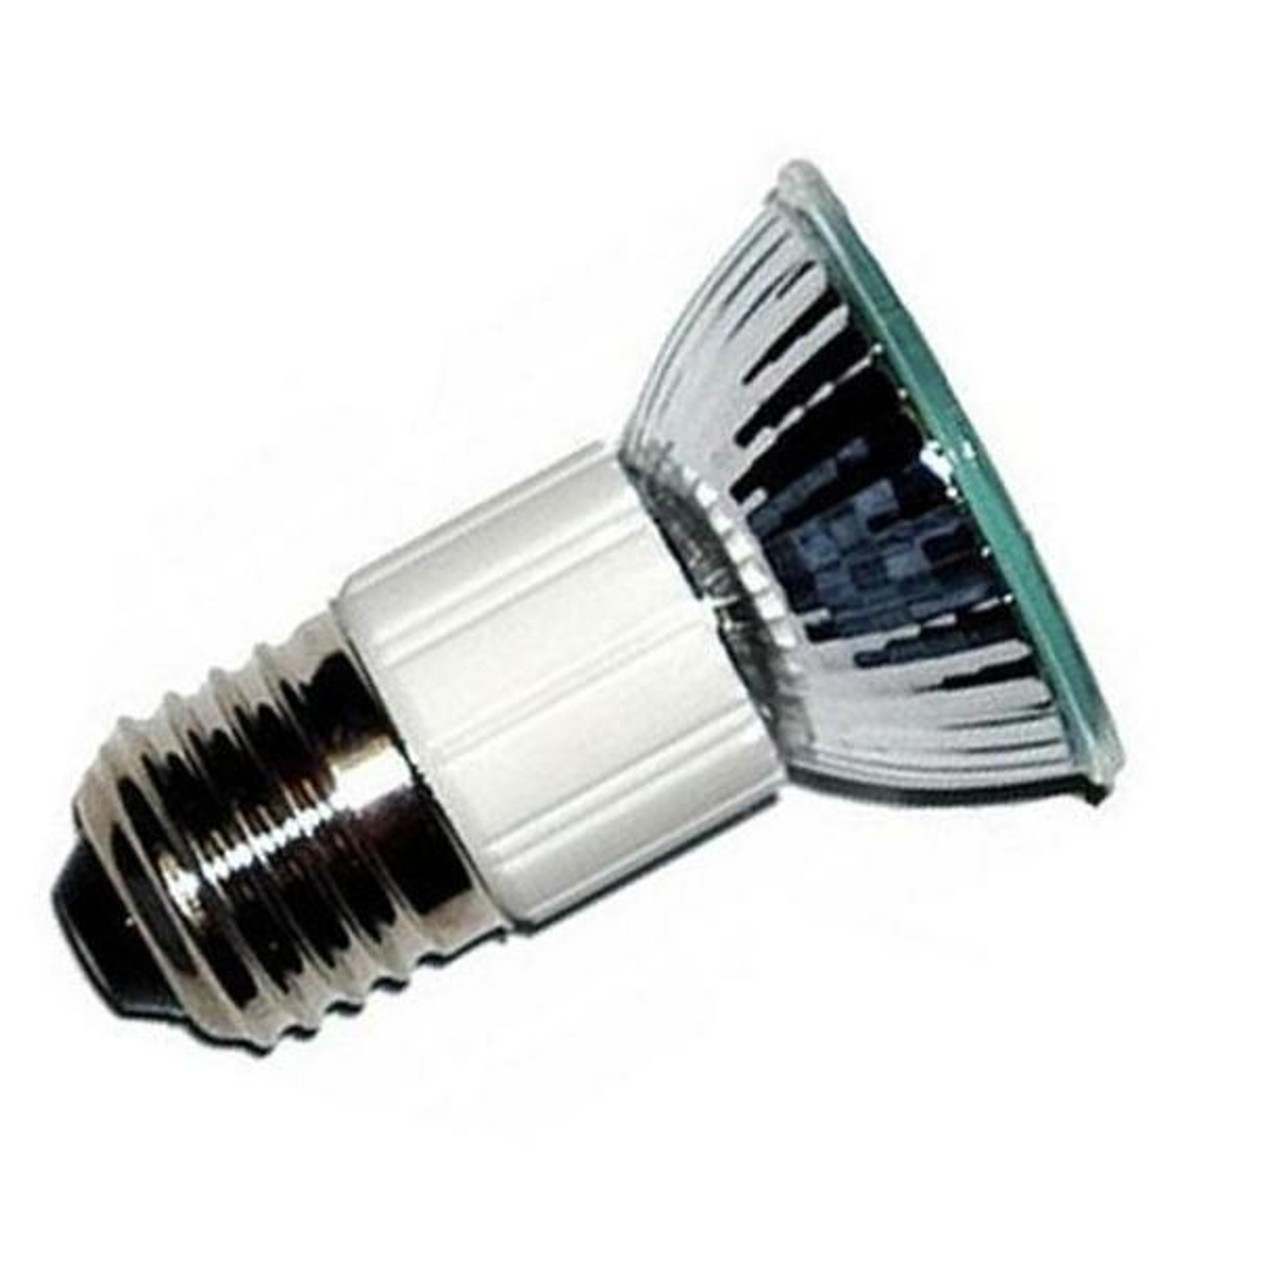 REPLACEMENT BULB FOR LIGHT BULB / LAMP JDR-C GU10 50W 120V 50W